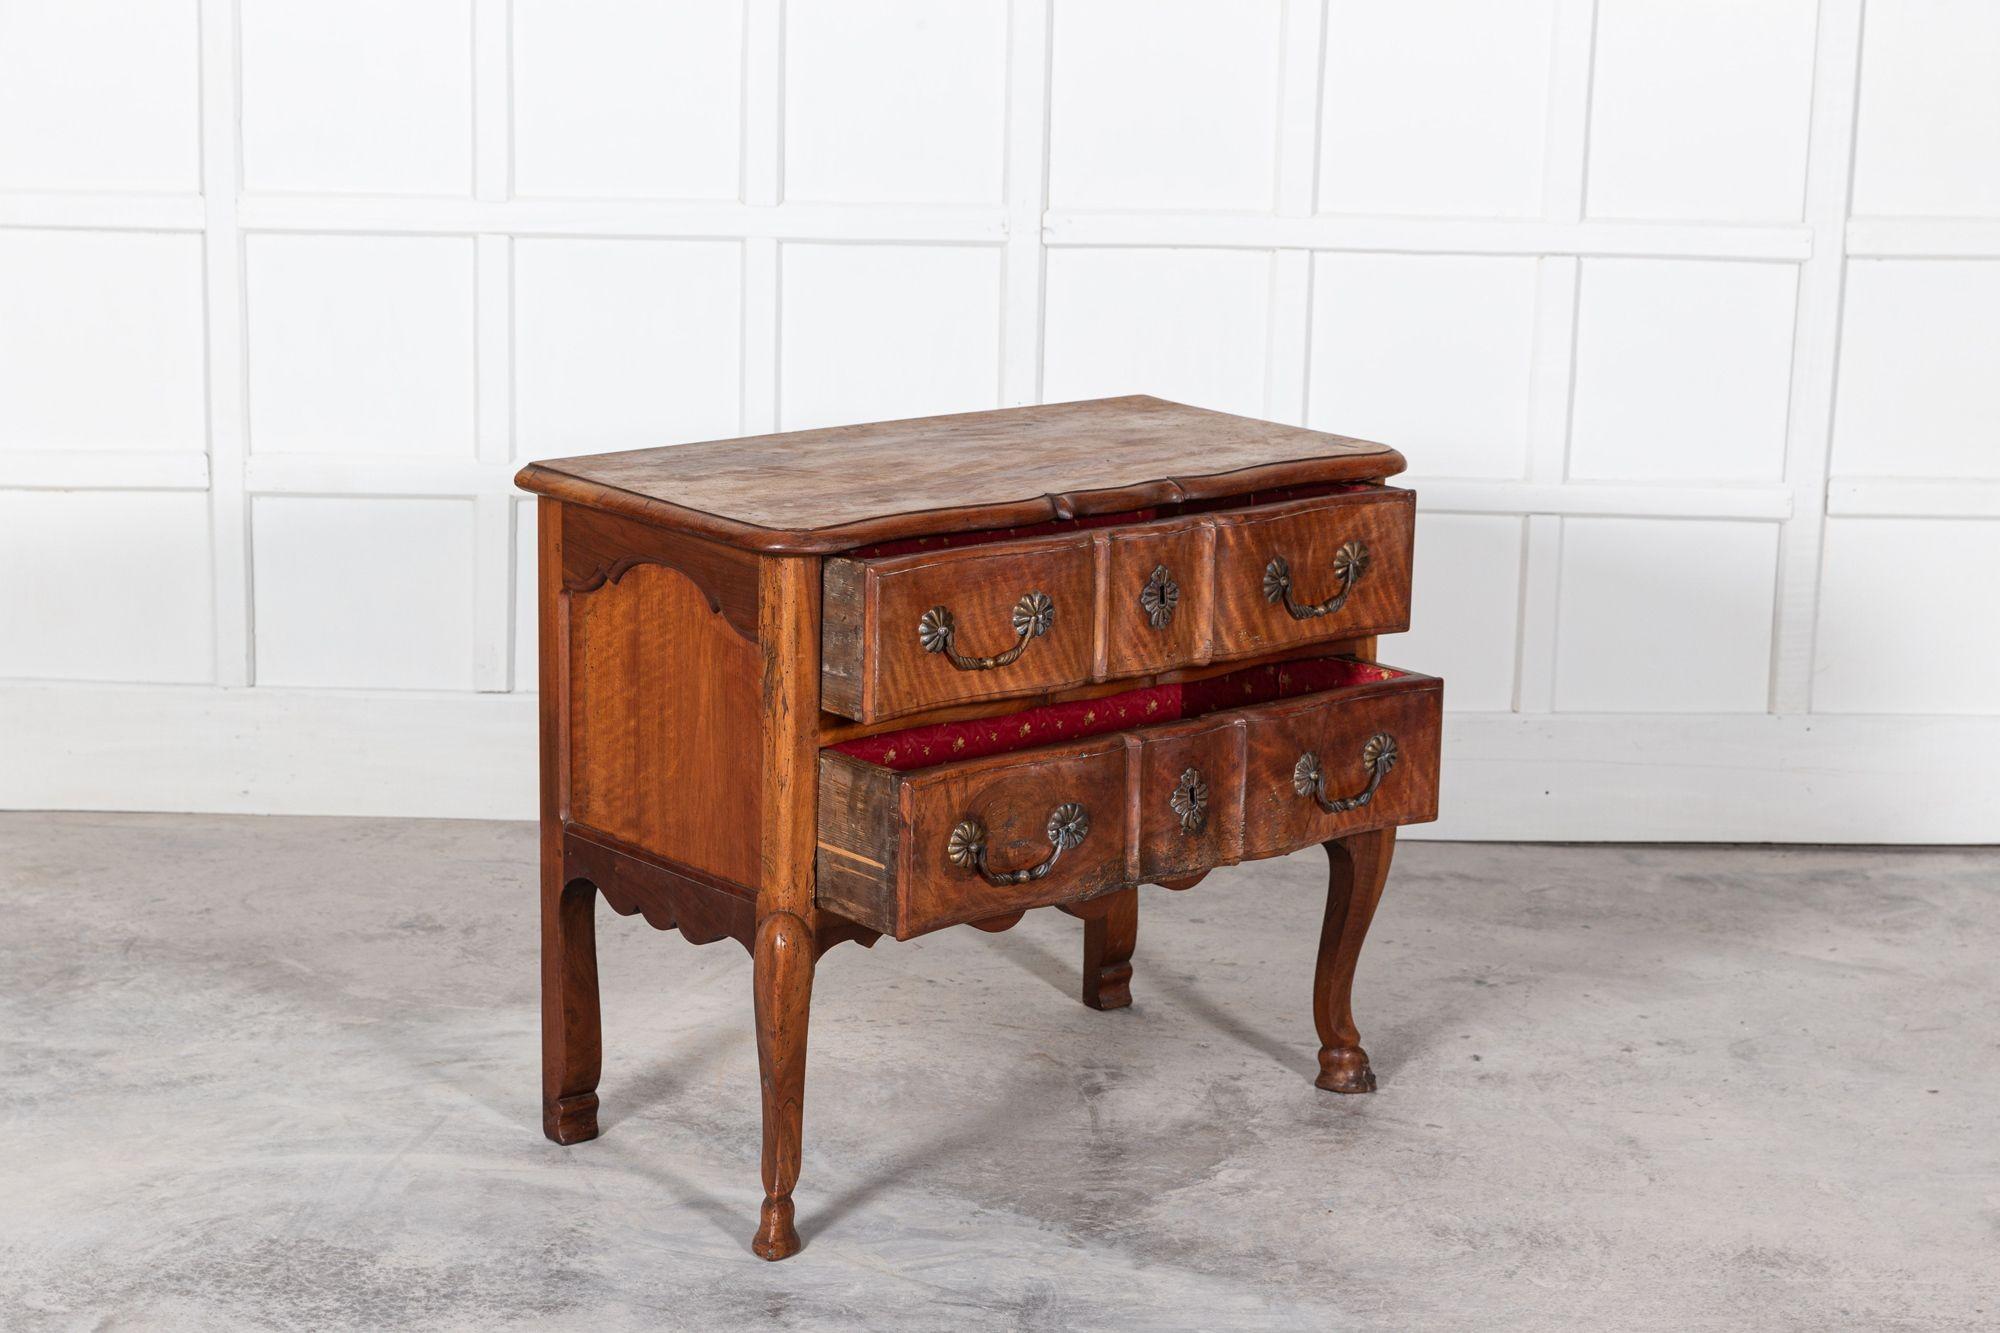 circa 1830
Early 19thC French walnut commode - a two drawer commode with hoof feet detail and lovely warm patina.
Measures: W 100 x D 50 x H 83cm.
  